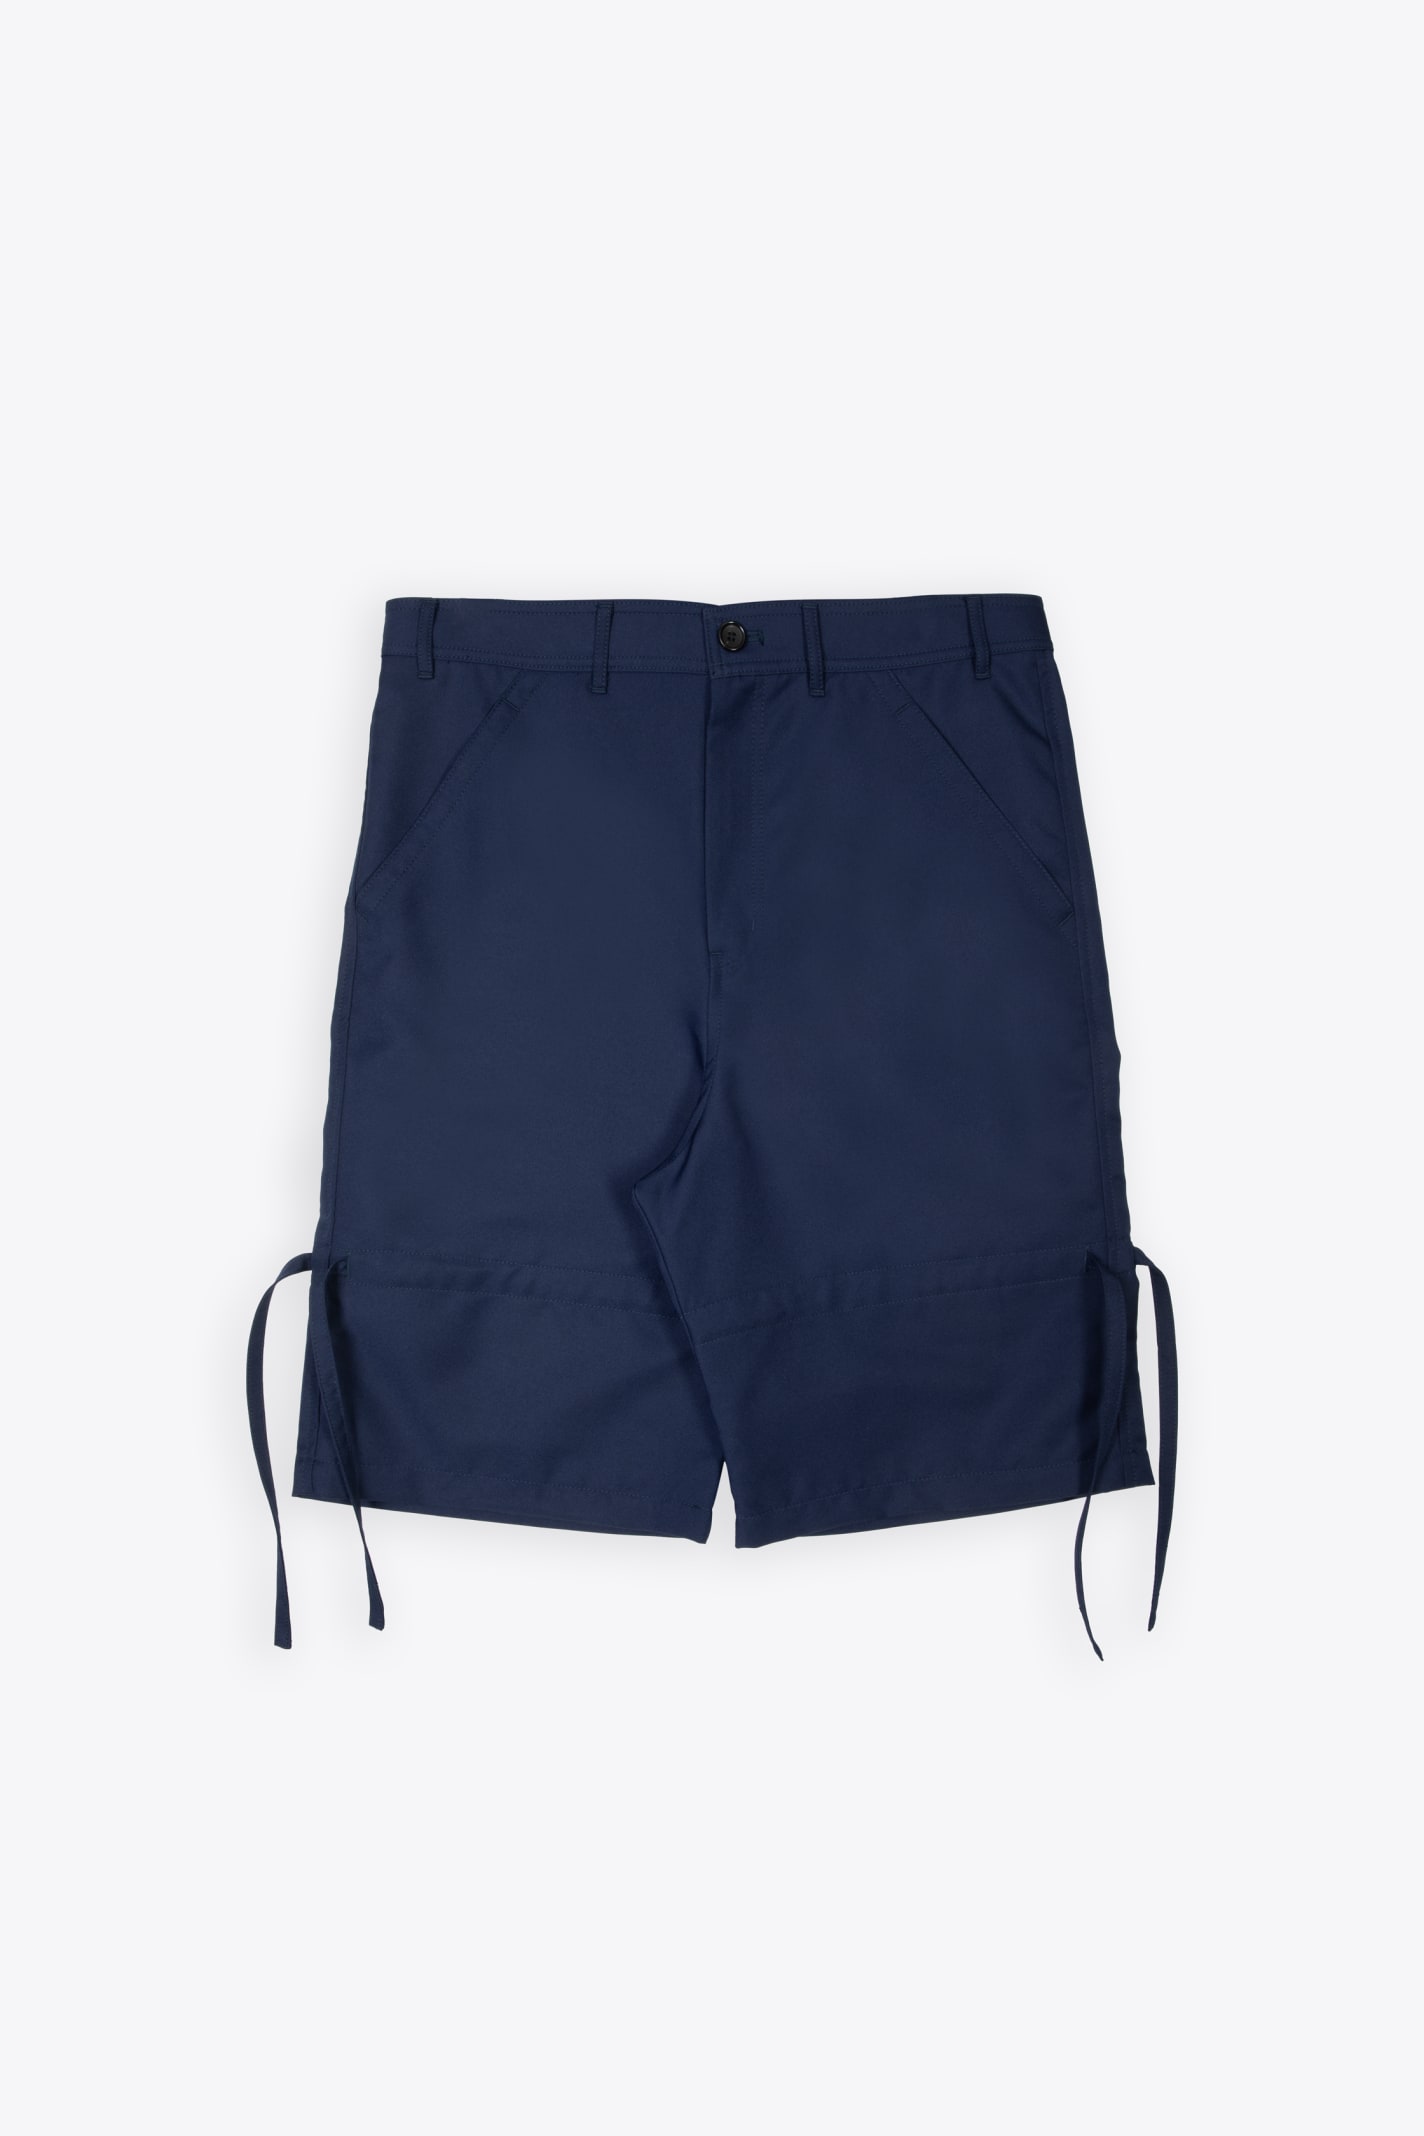 Mens Pants Woven Navy blue baggy shorts with ribbons detail